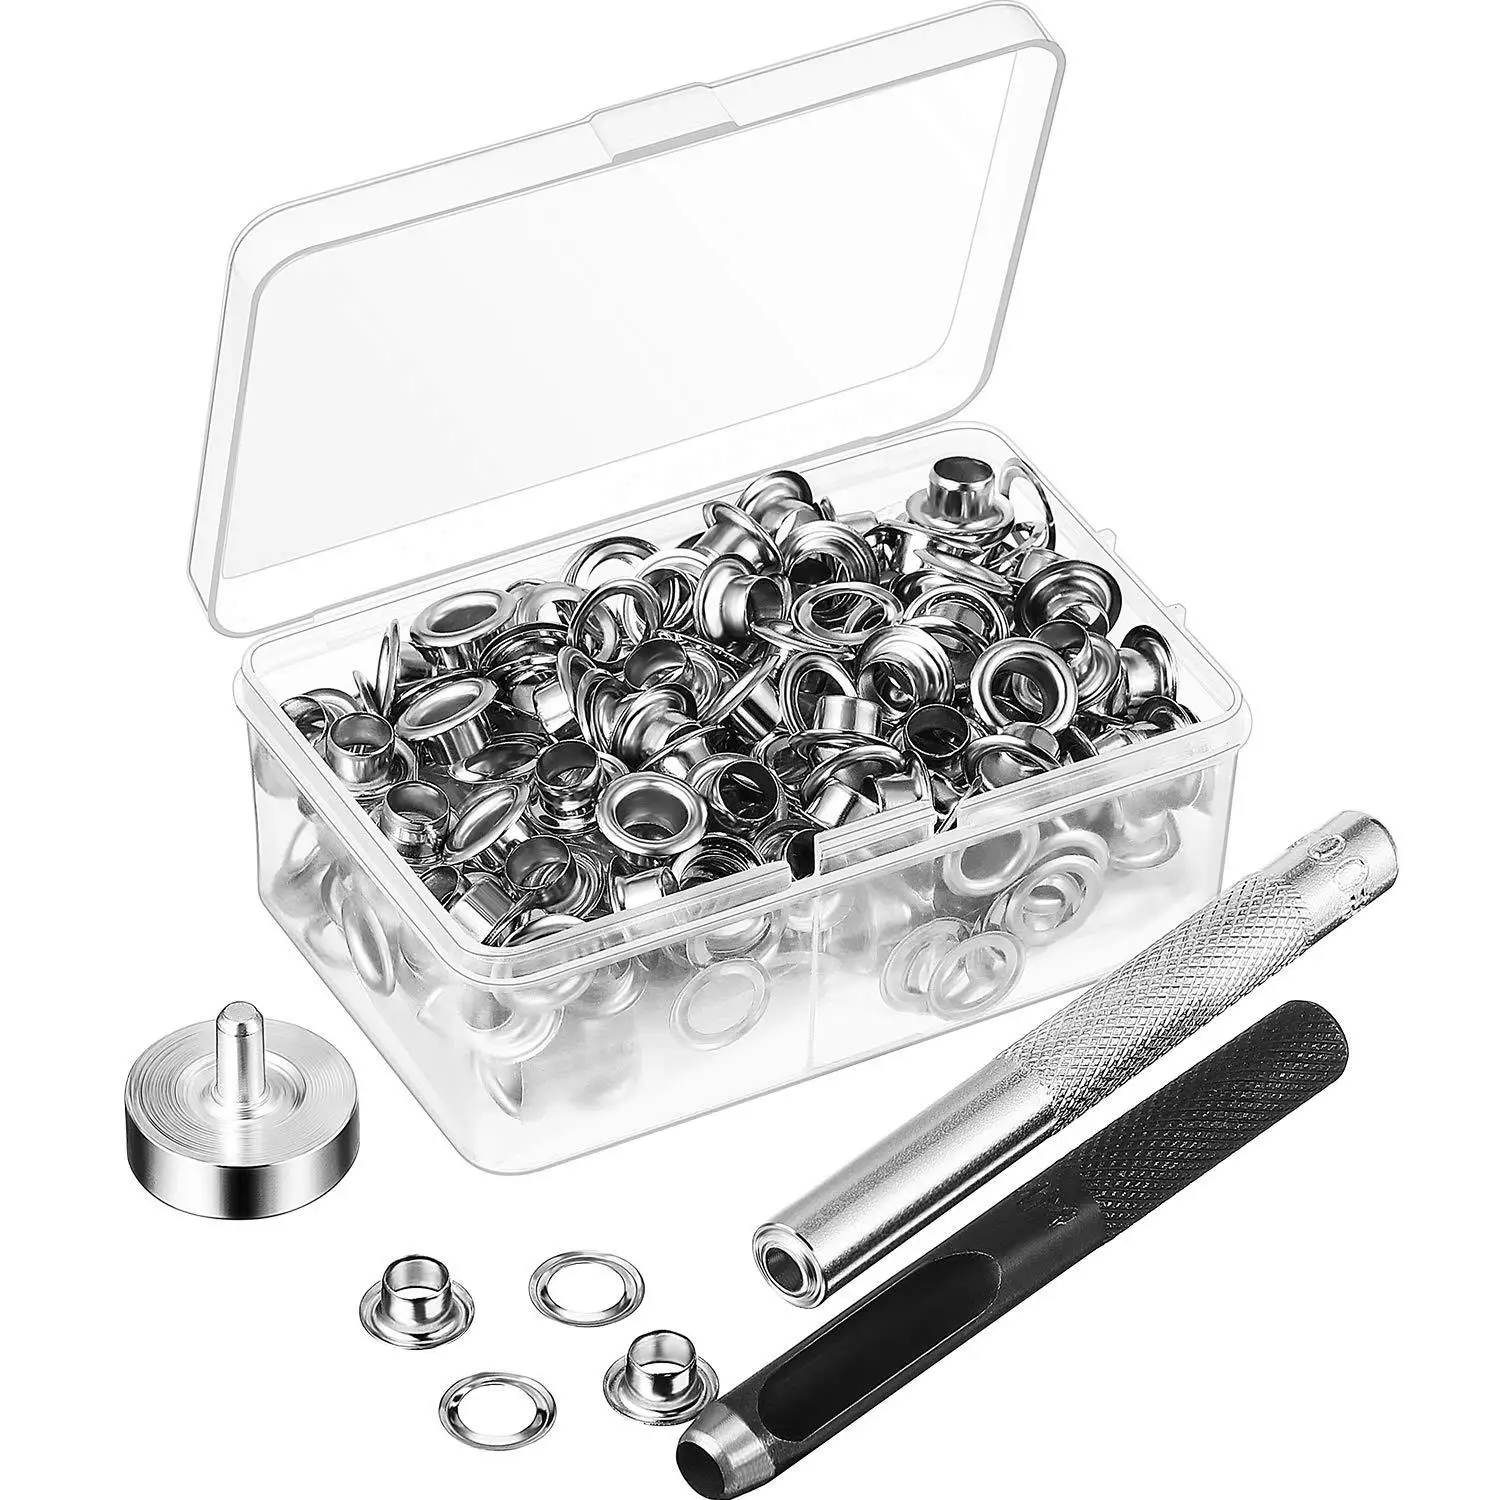 silvery 100 Sets Internal Diameter of 6mm Hole Eyelet And gasket 3 pcs Installation Tool garment accessories Q-037